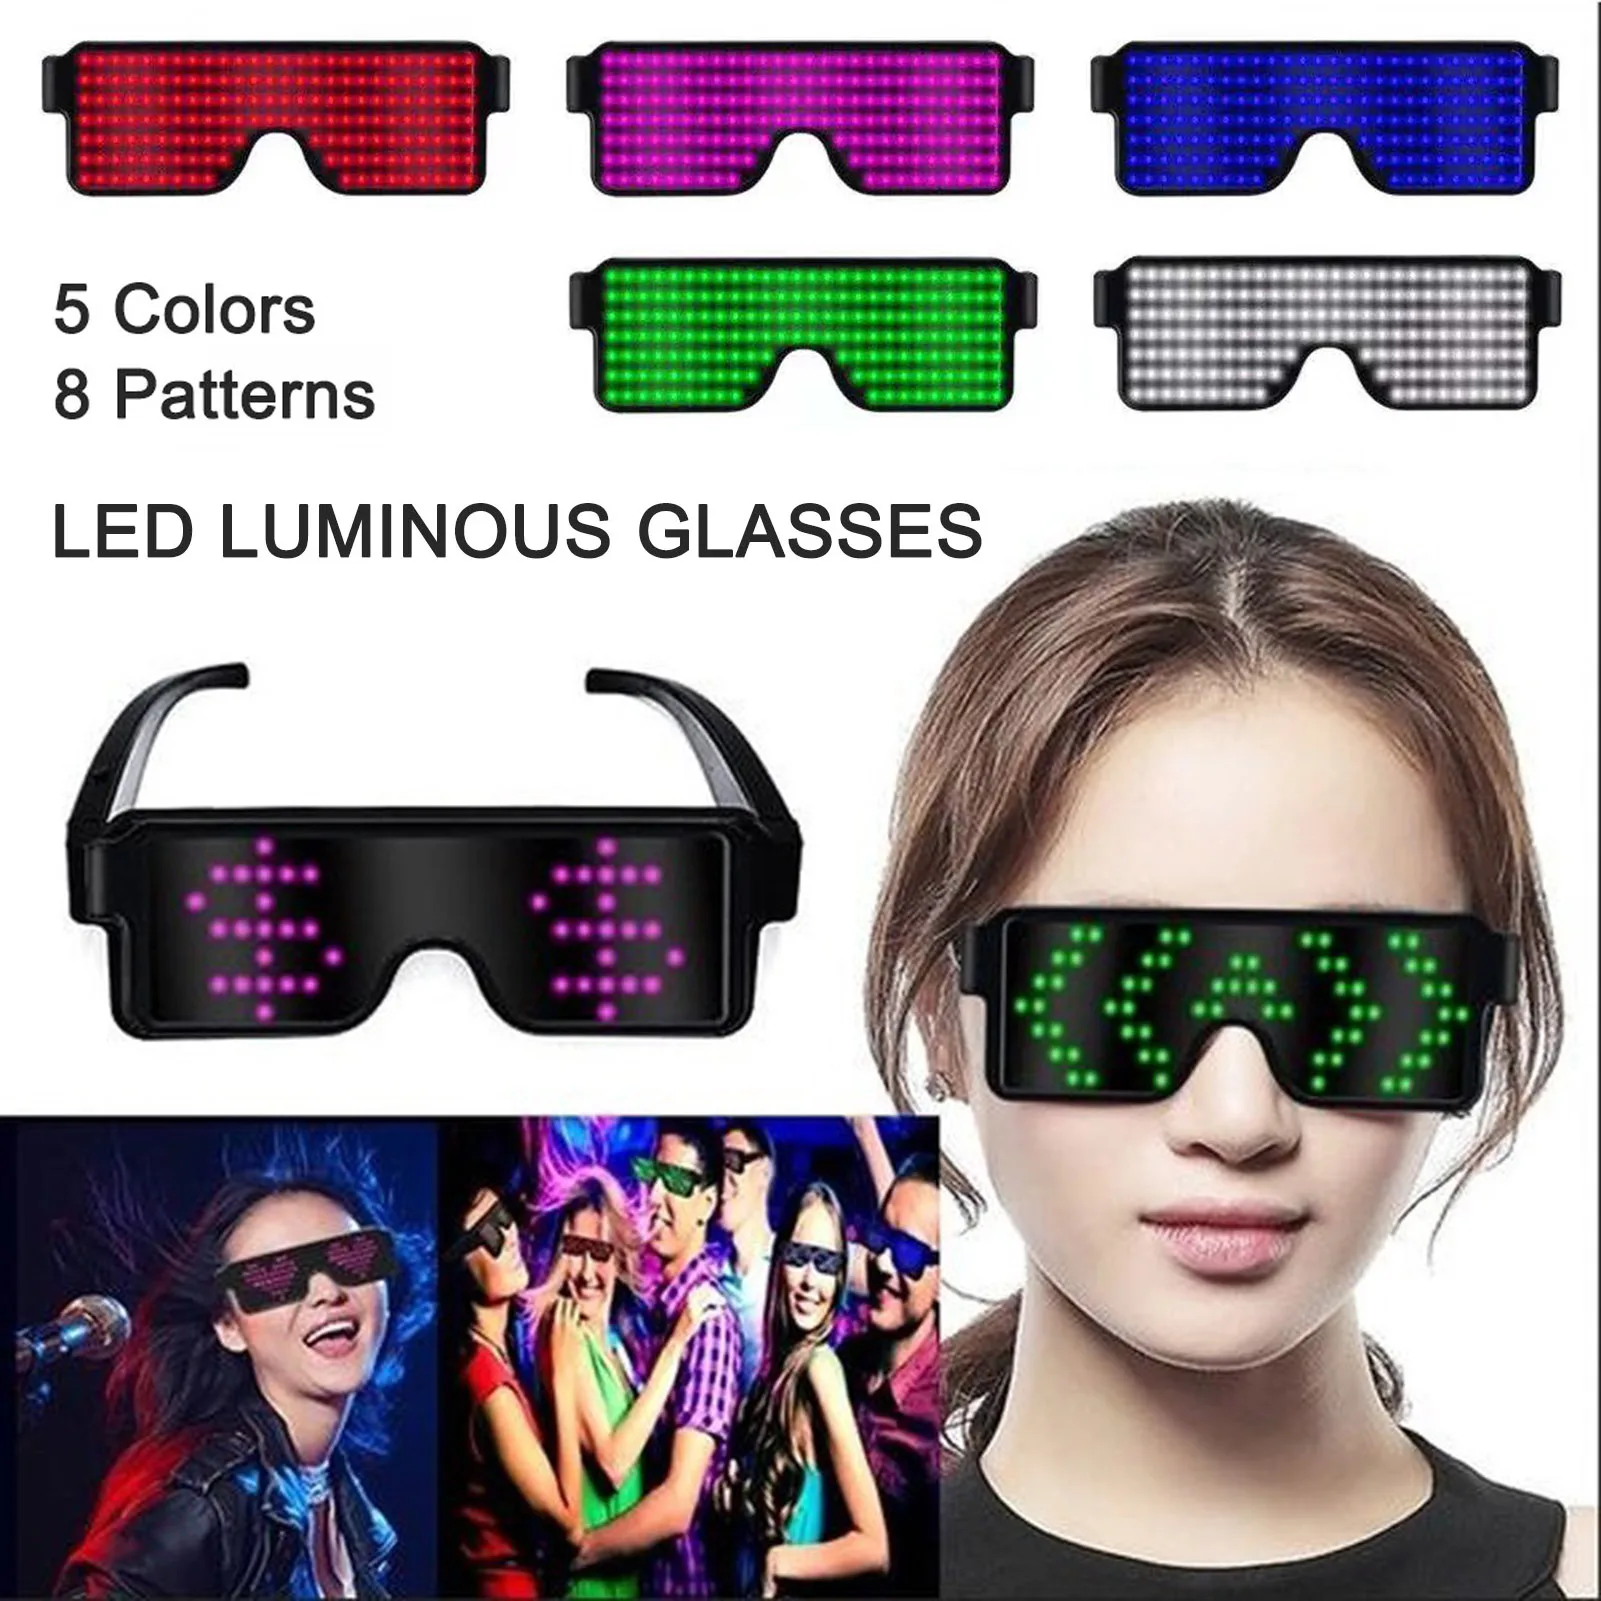 Parties Halloween Nightclub Christmas Customizable LED Glasses Light Up USB Rechargeable 8 Patterns LED Luminous Glasses for Raves Green 